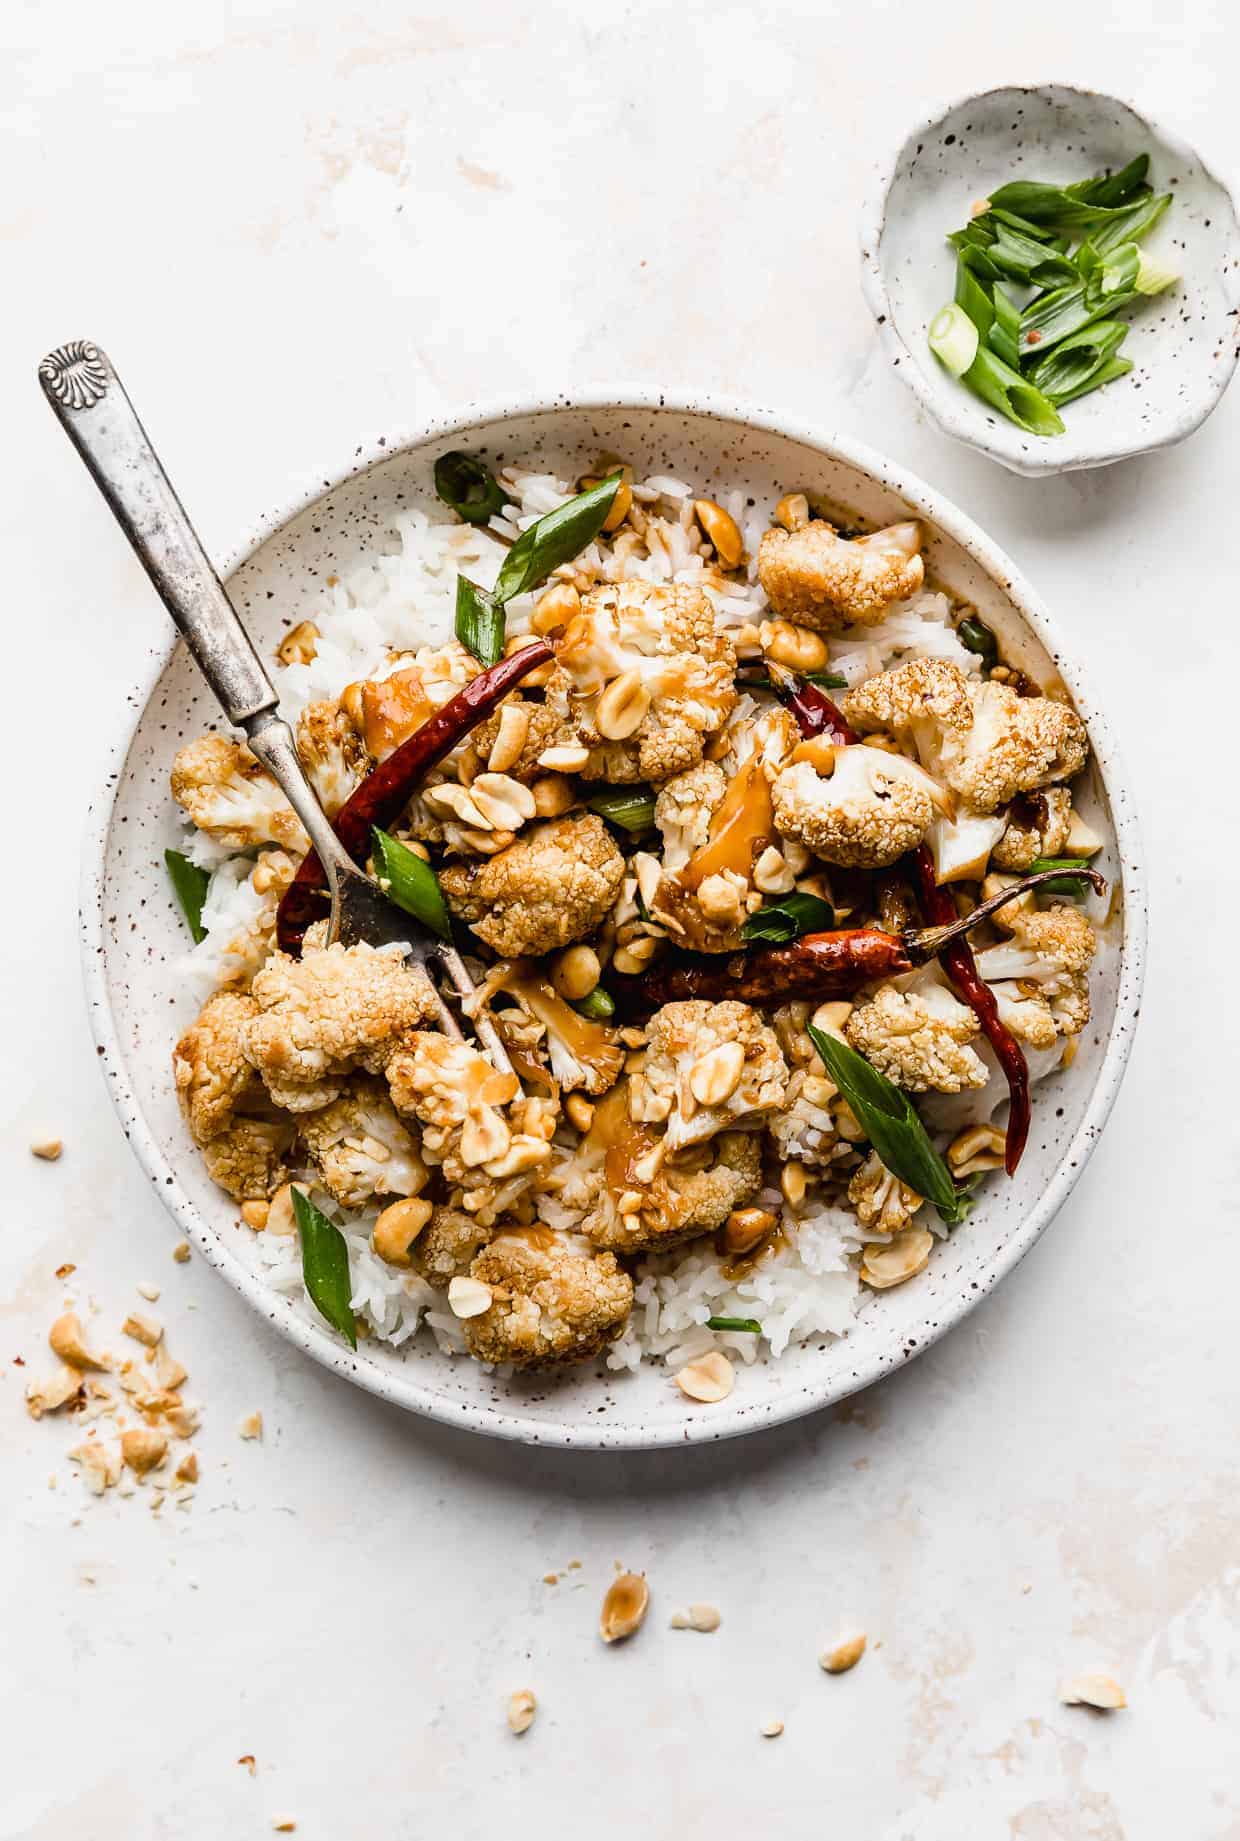 A white plate full of Kung Pao Cauliflower against a white background.